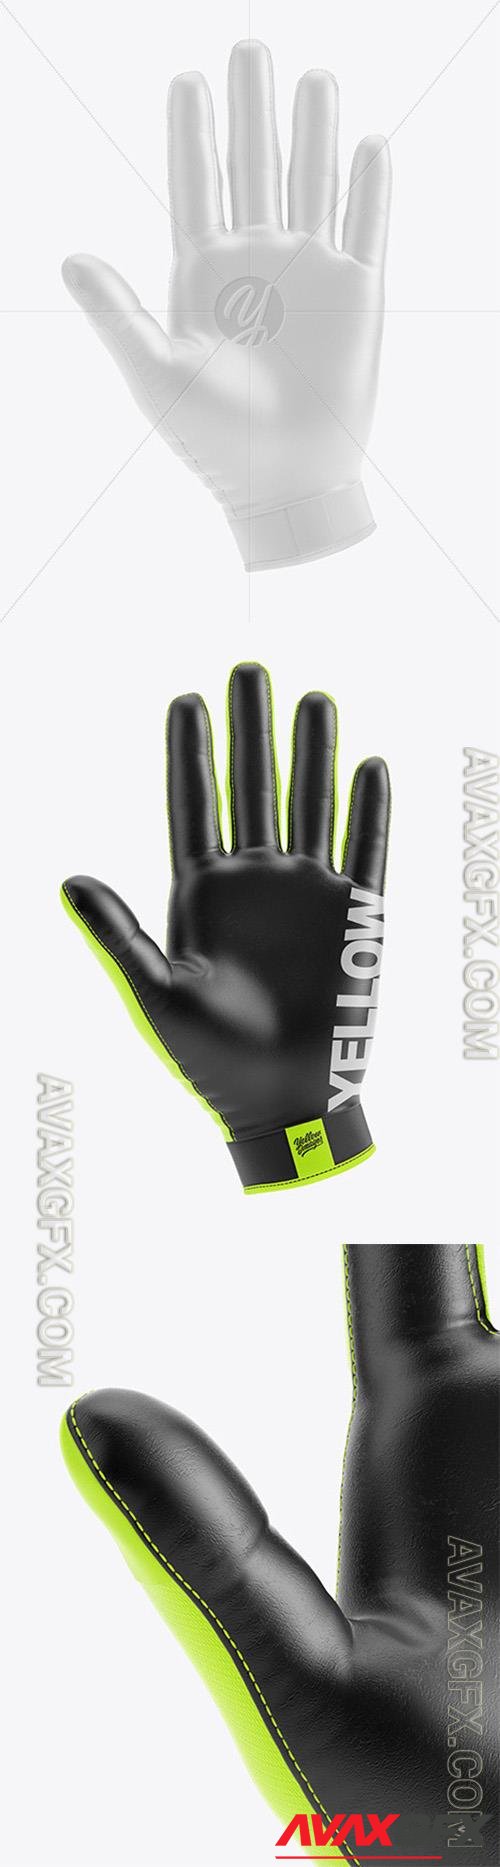 Football Glove Mockup - Front View 73144